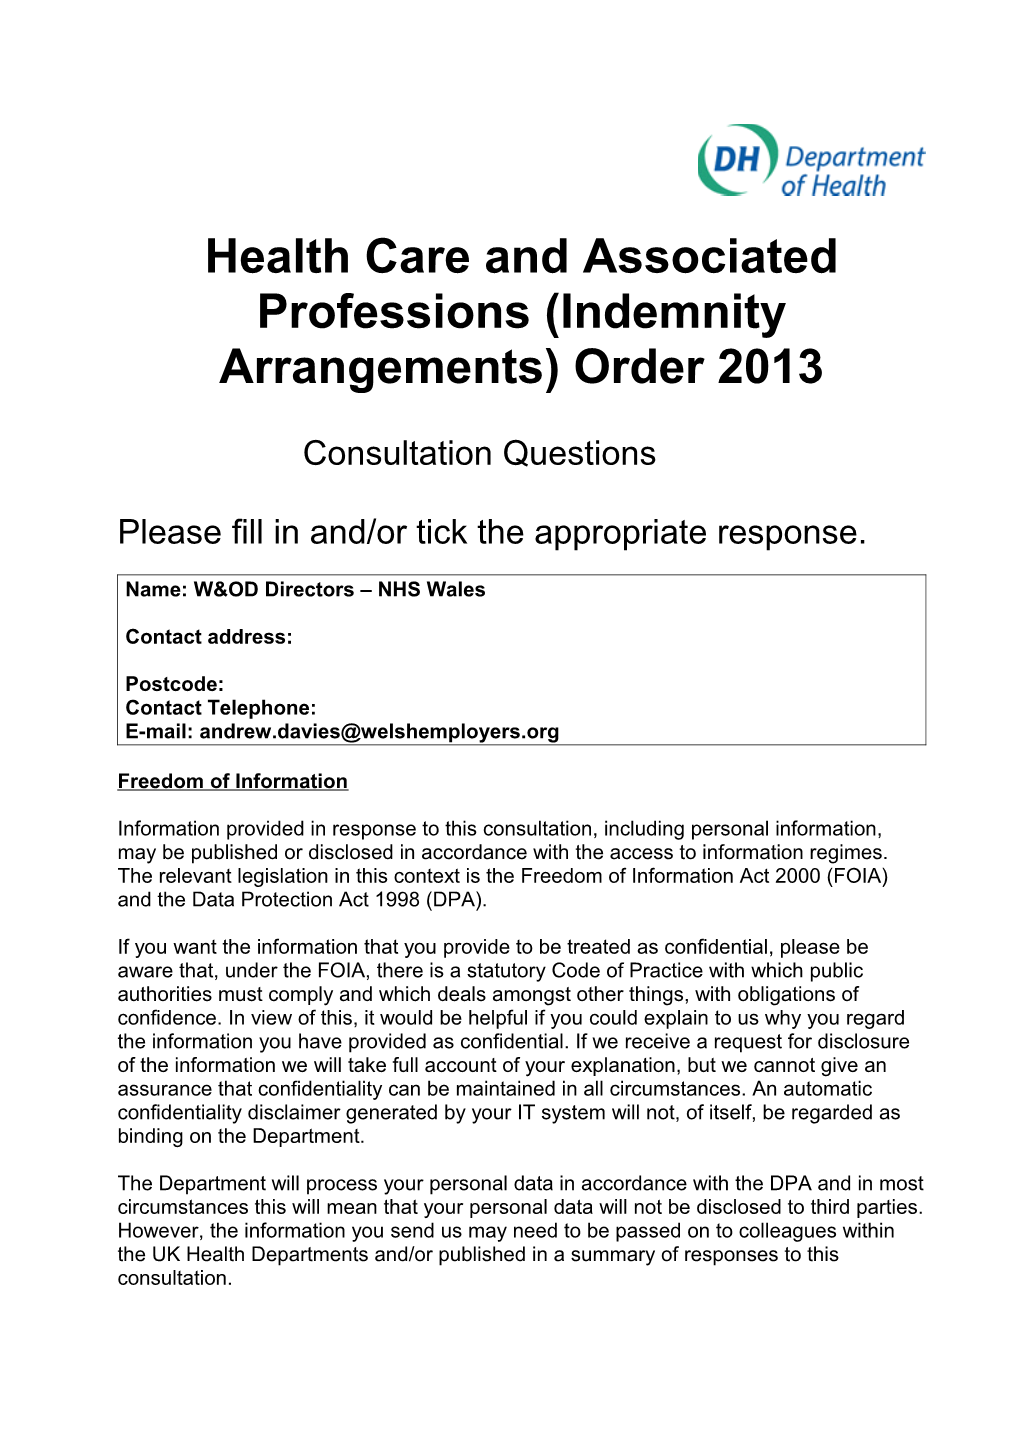 Health Care and Associated Professions (Indemnity Arrangements) Order 2013